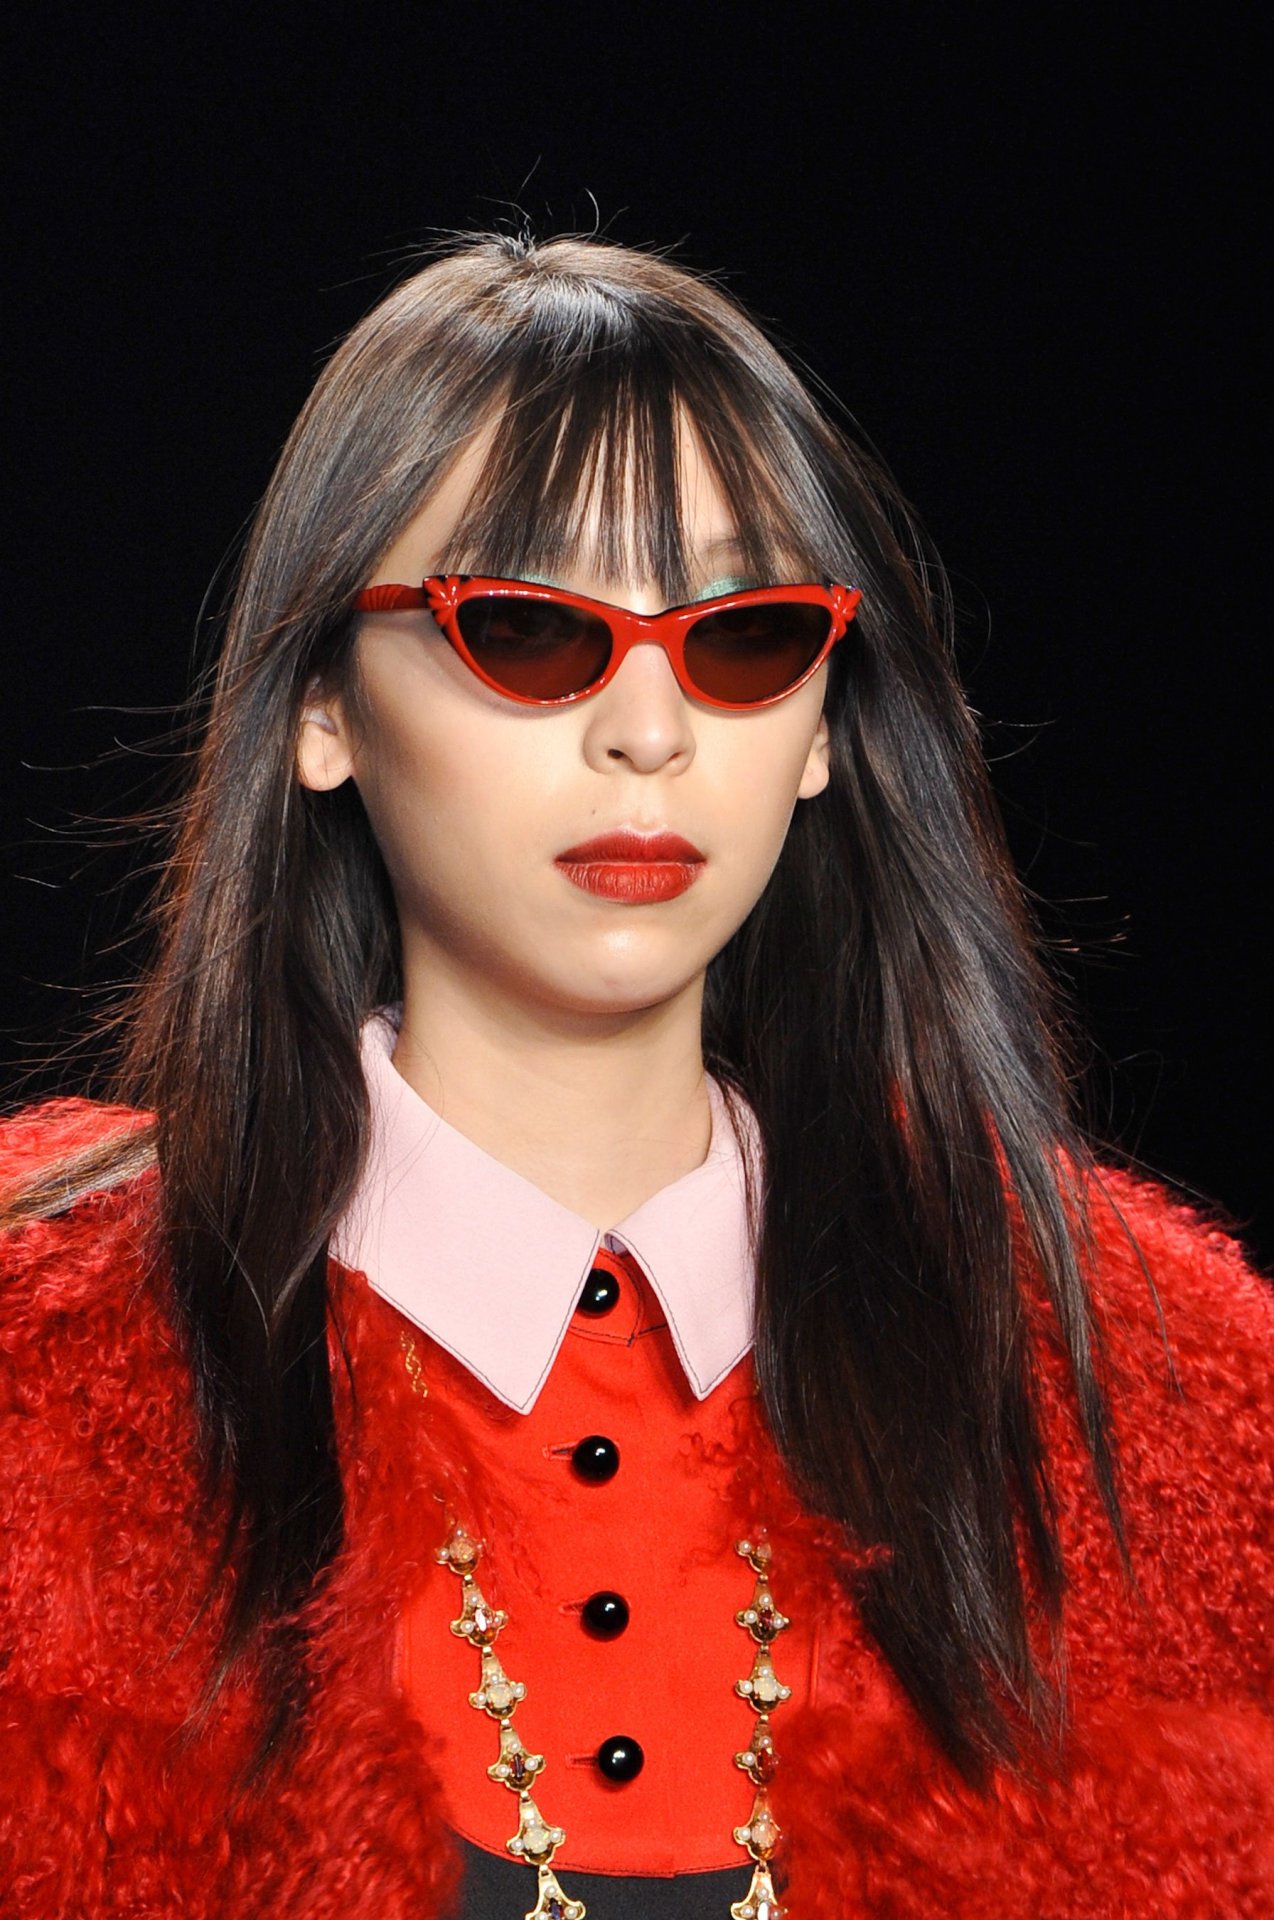 Mexican Models Blog: Issa Lish opens the Anna Sui Autumn/Winter 2014 ...